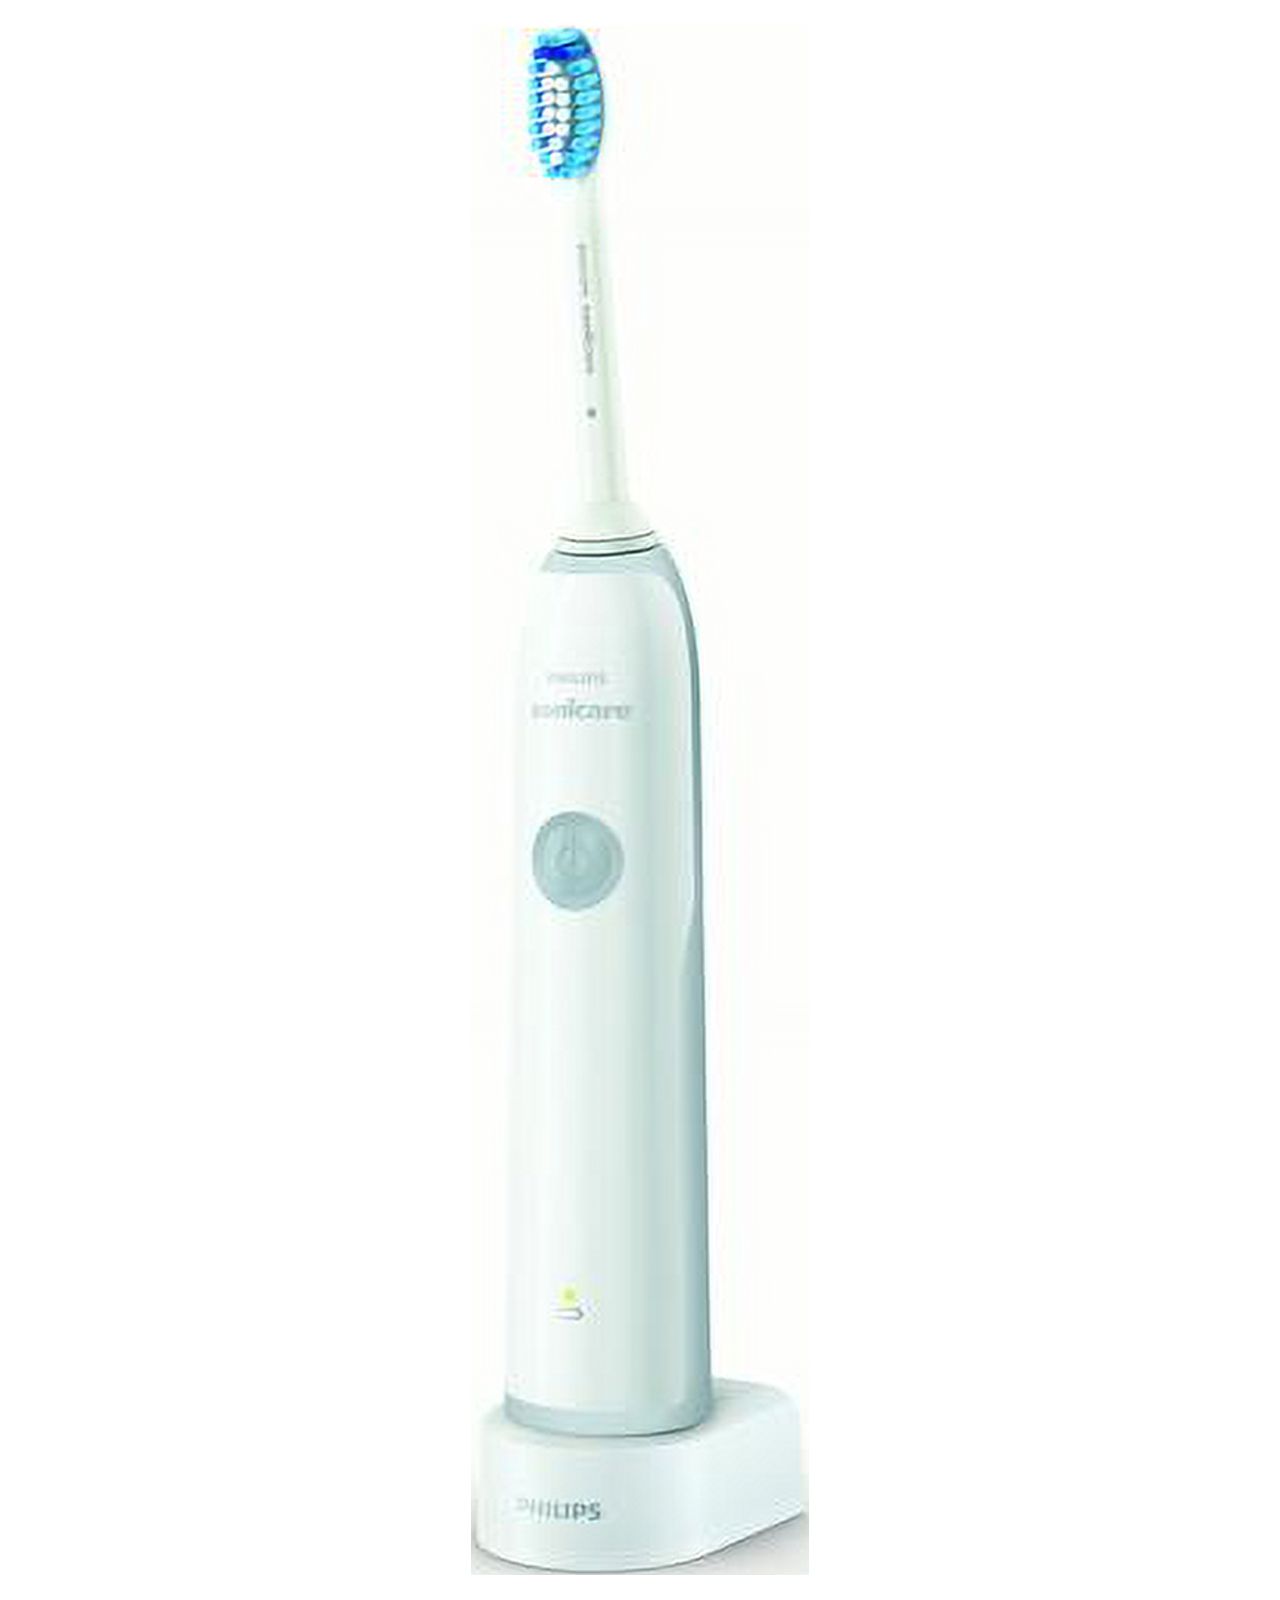 Philips Sonicare Essence+ Sonic Electric Rechargeable Toothbrush Light Blue - image 2 of 2